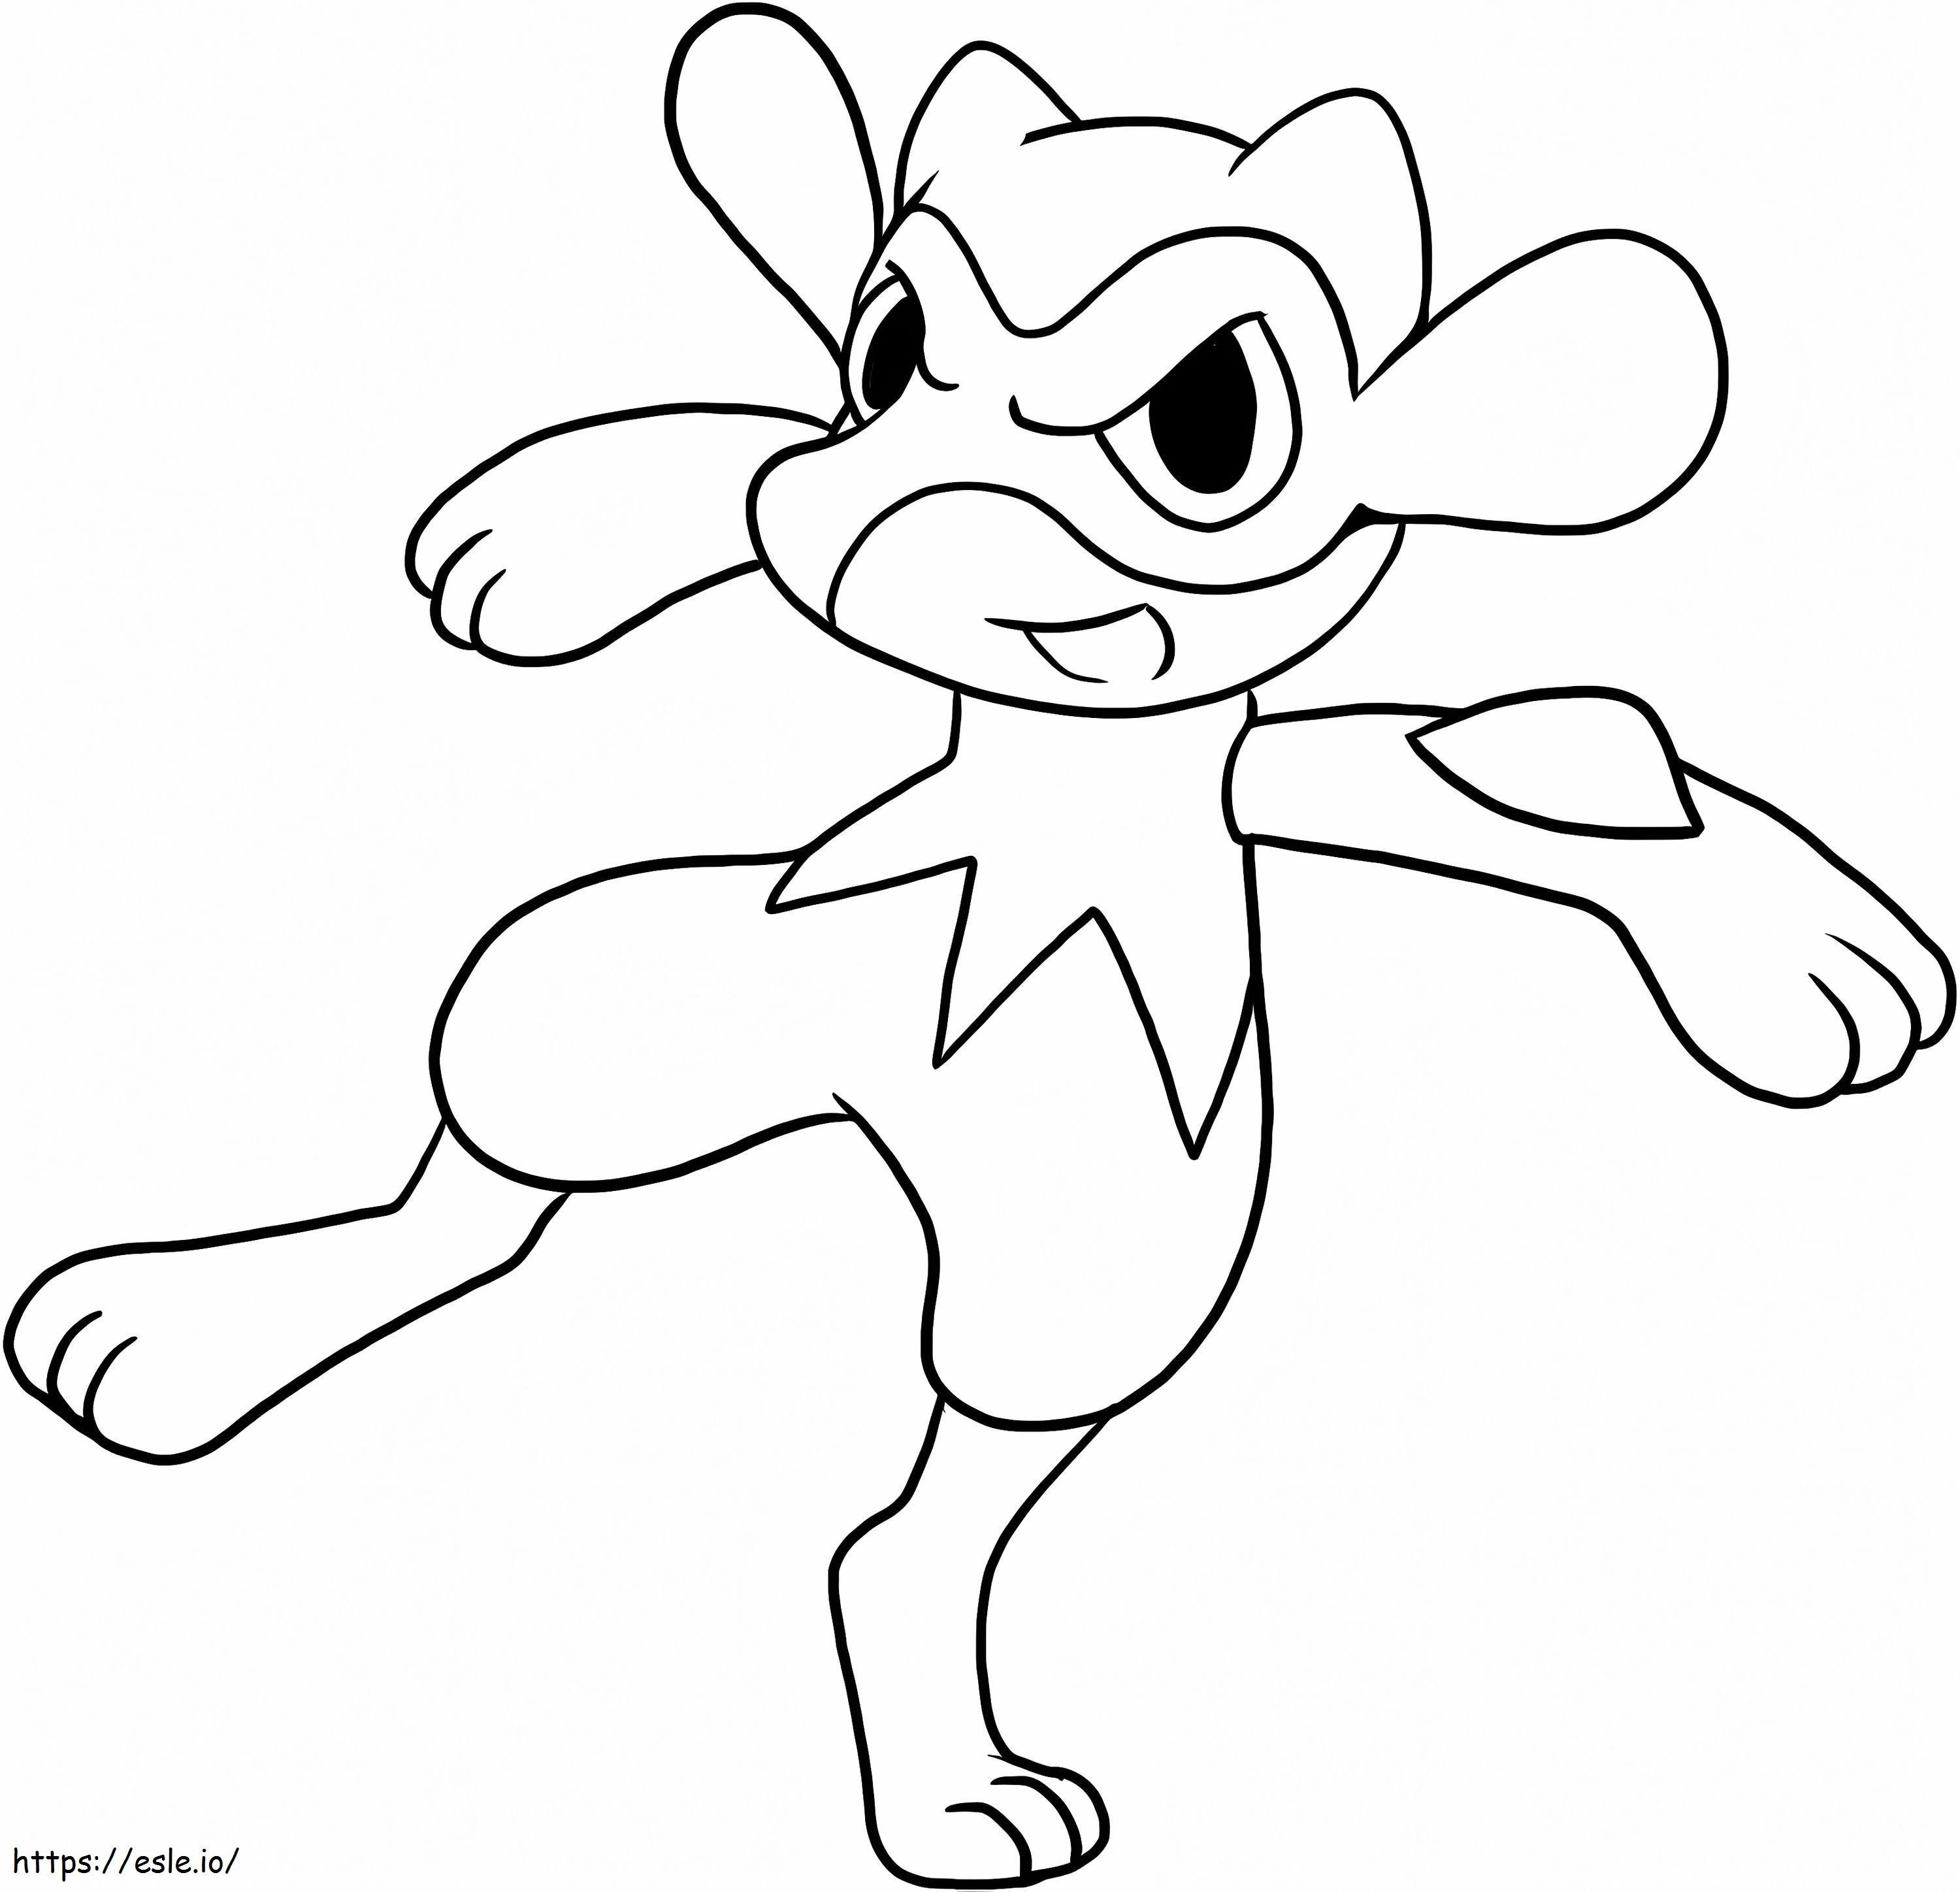 1529293132 87 coloring page